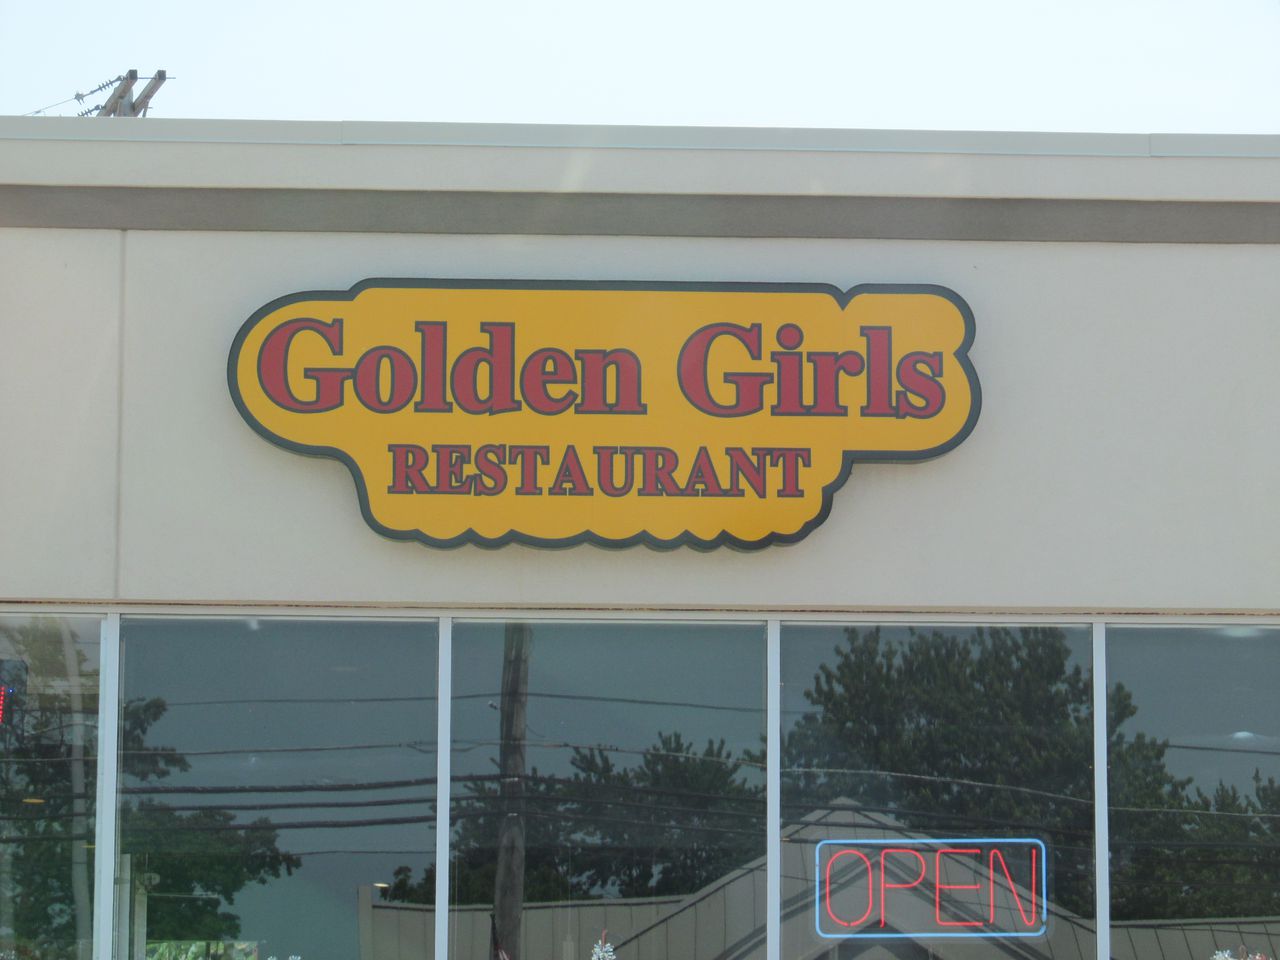 Golden Girls Restaurant has one of the highest health inspector violation counts in Lake County.